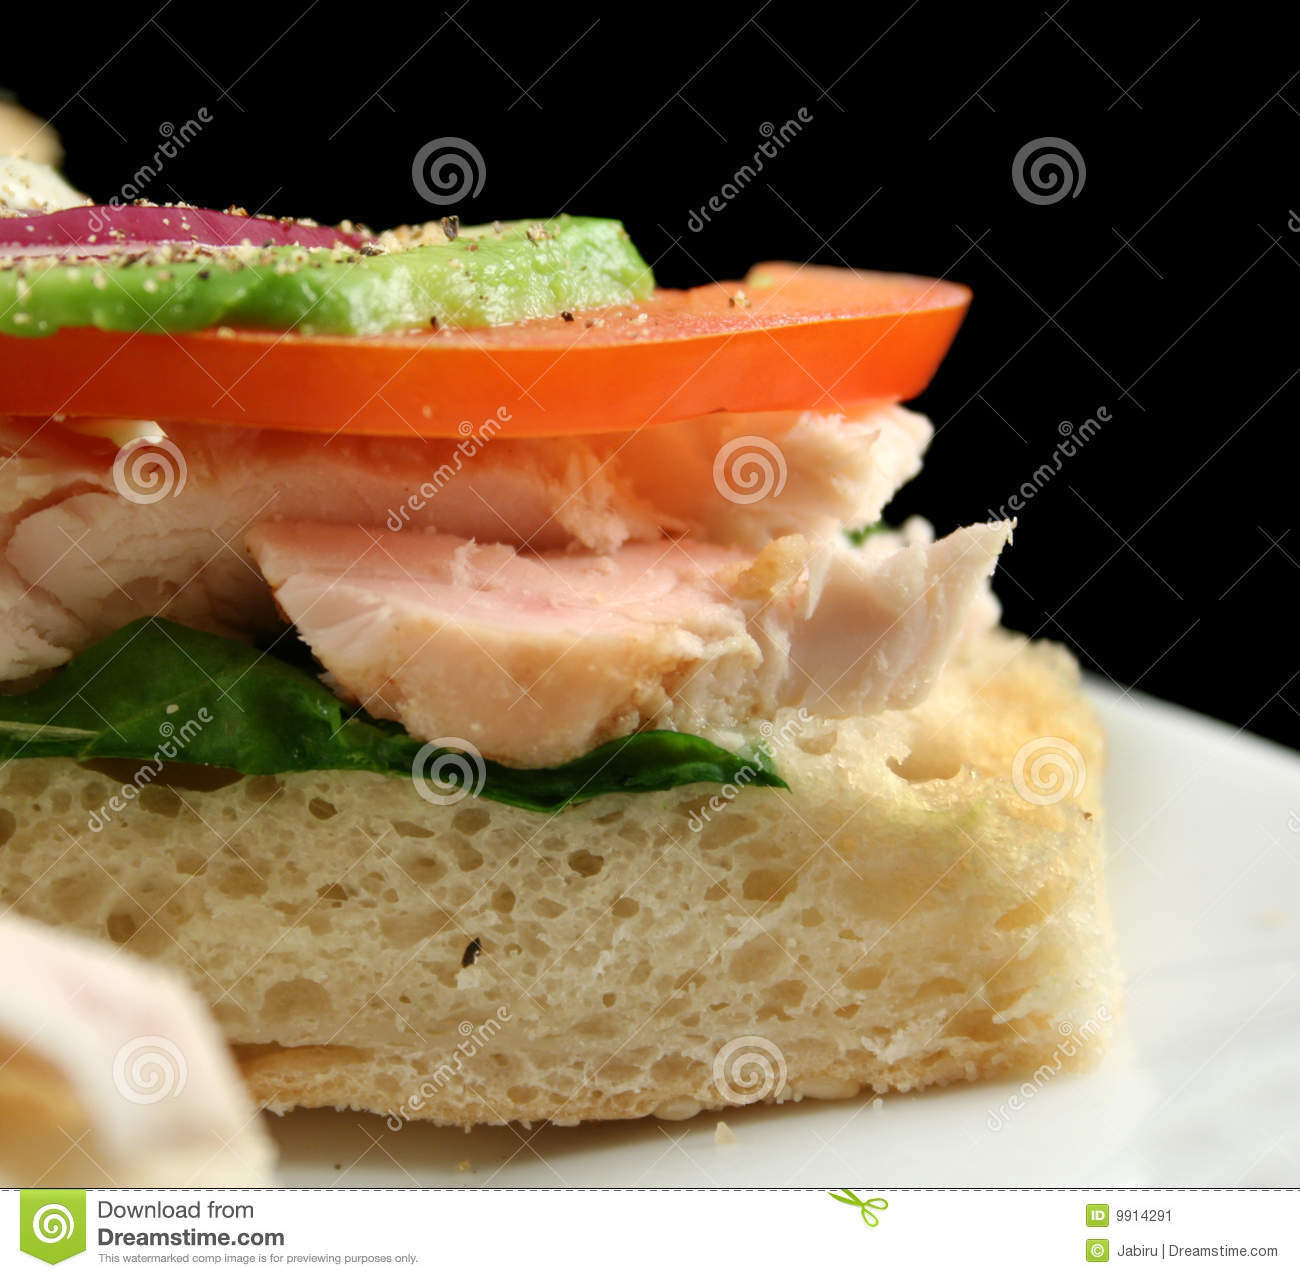 Chicken Finger Sandwiches
 Chicken Finger Sandwich stock image Image of nutritional